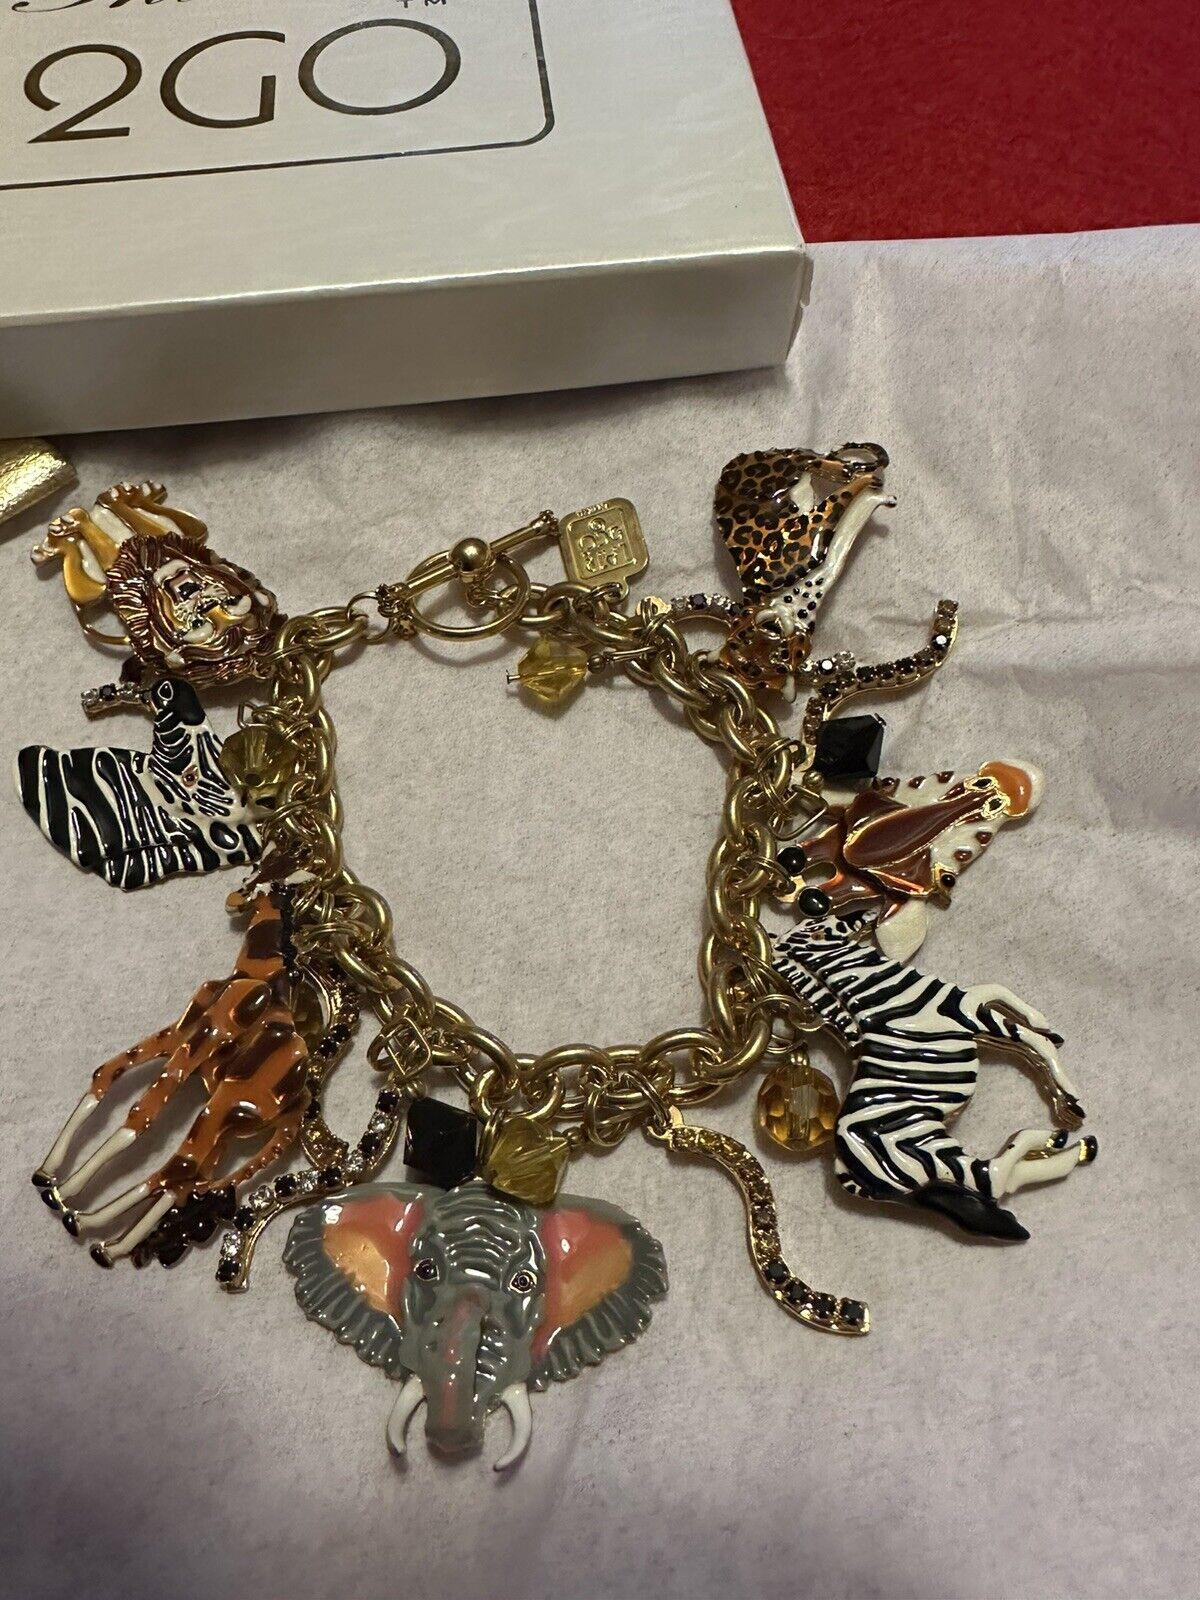 Simply Wonderful! Vintage Statement Signed Lunch at the Ritz 2GO Safari Gold tone Link Charm Bracelet. Brimming with Enamel Multi Charms. Featuring a Zebra, Elephant, Lion, Cheetah, Giraffe. Toggle clasp. Charms and beads vary in size.  Measuring